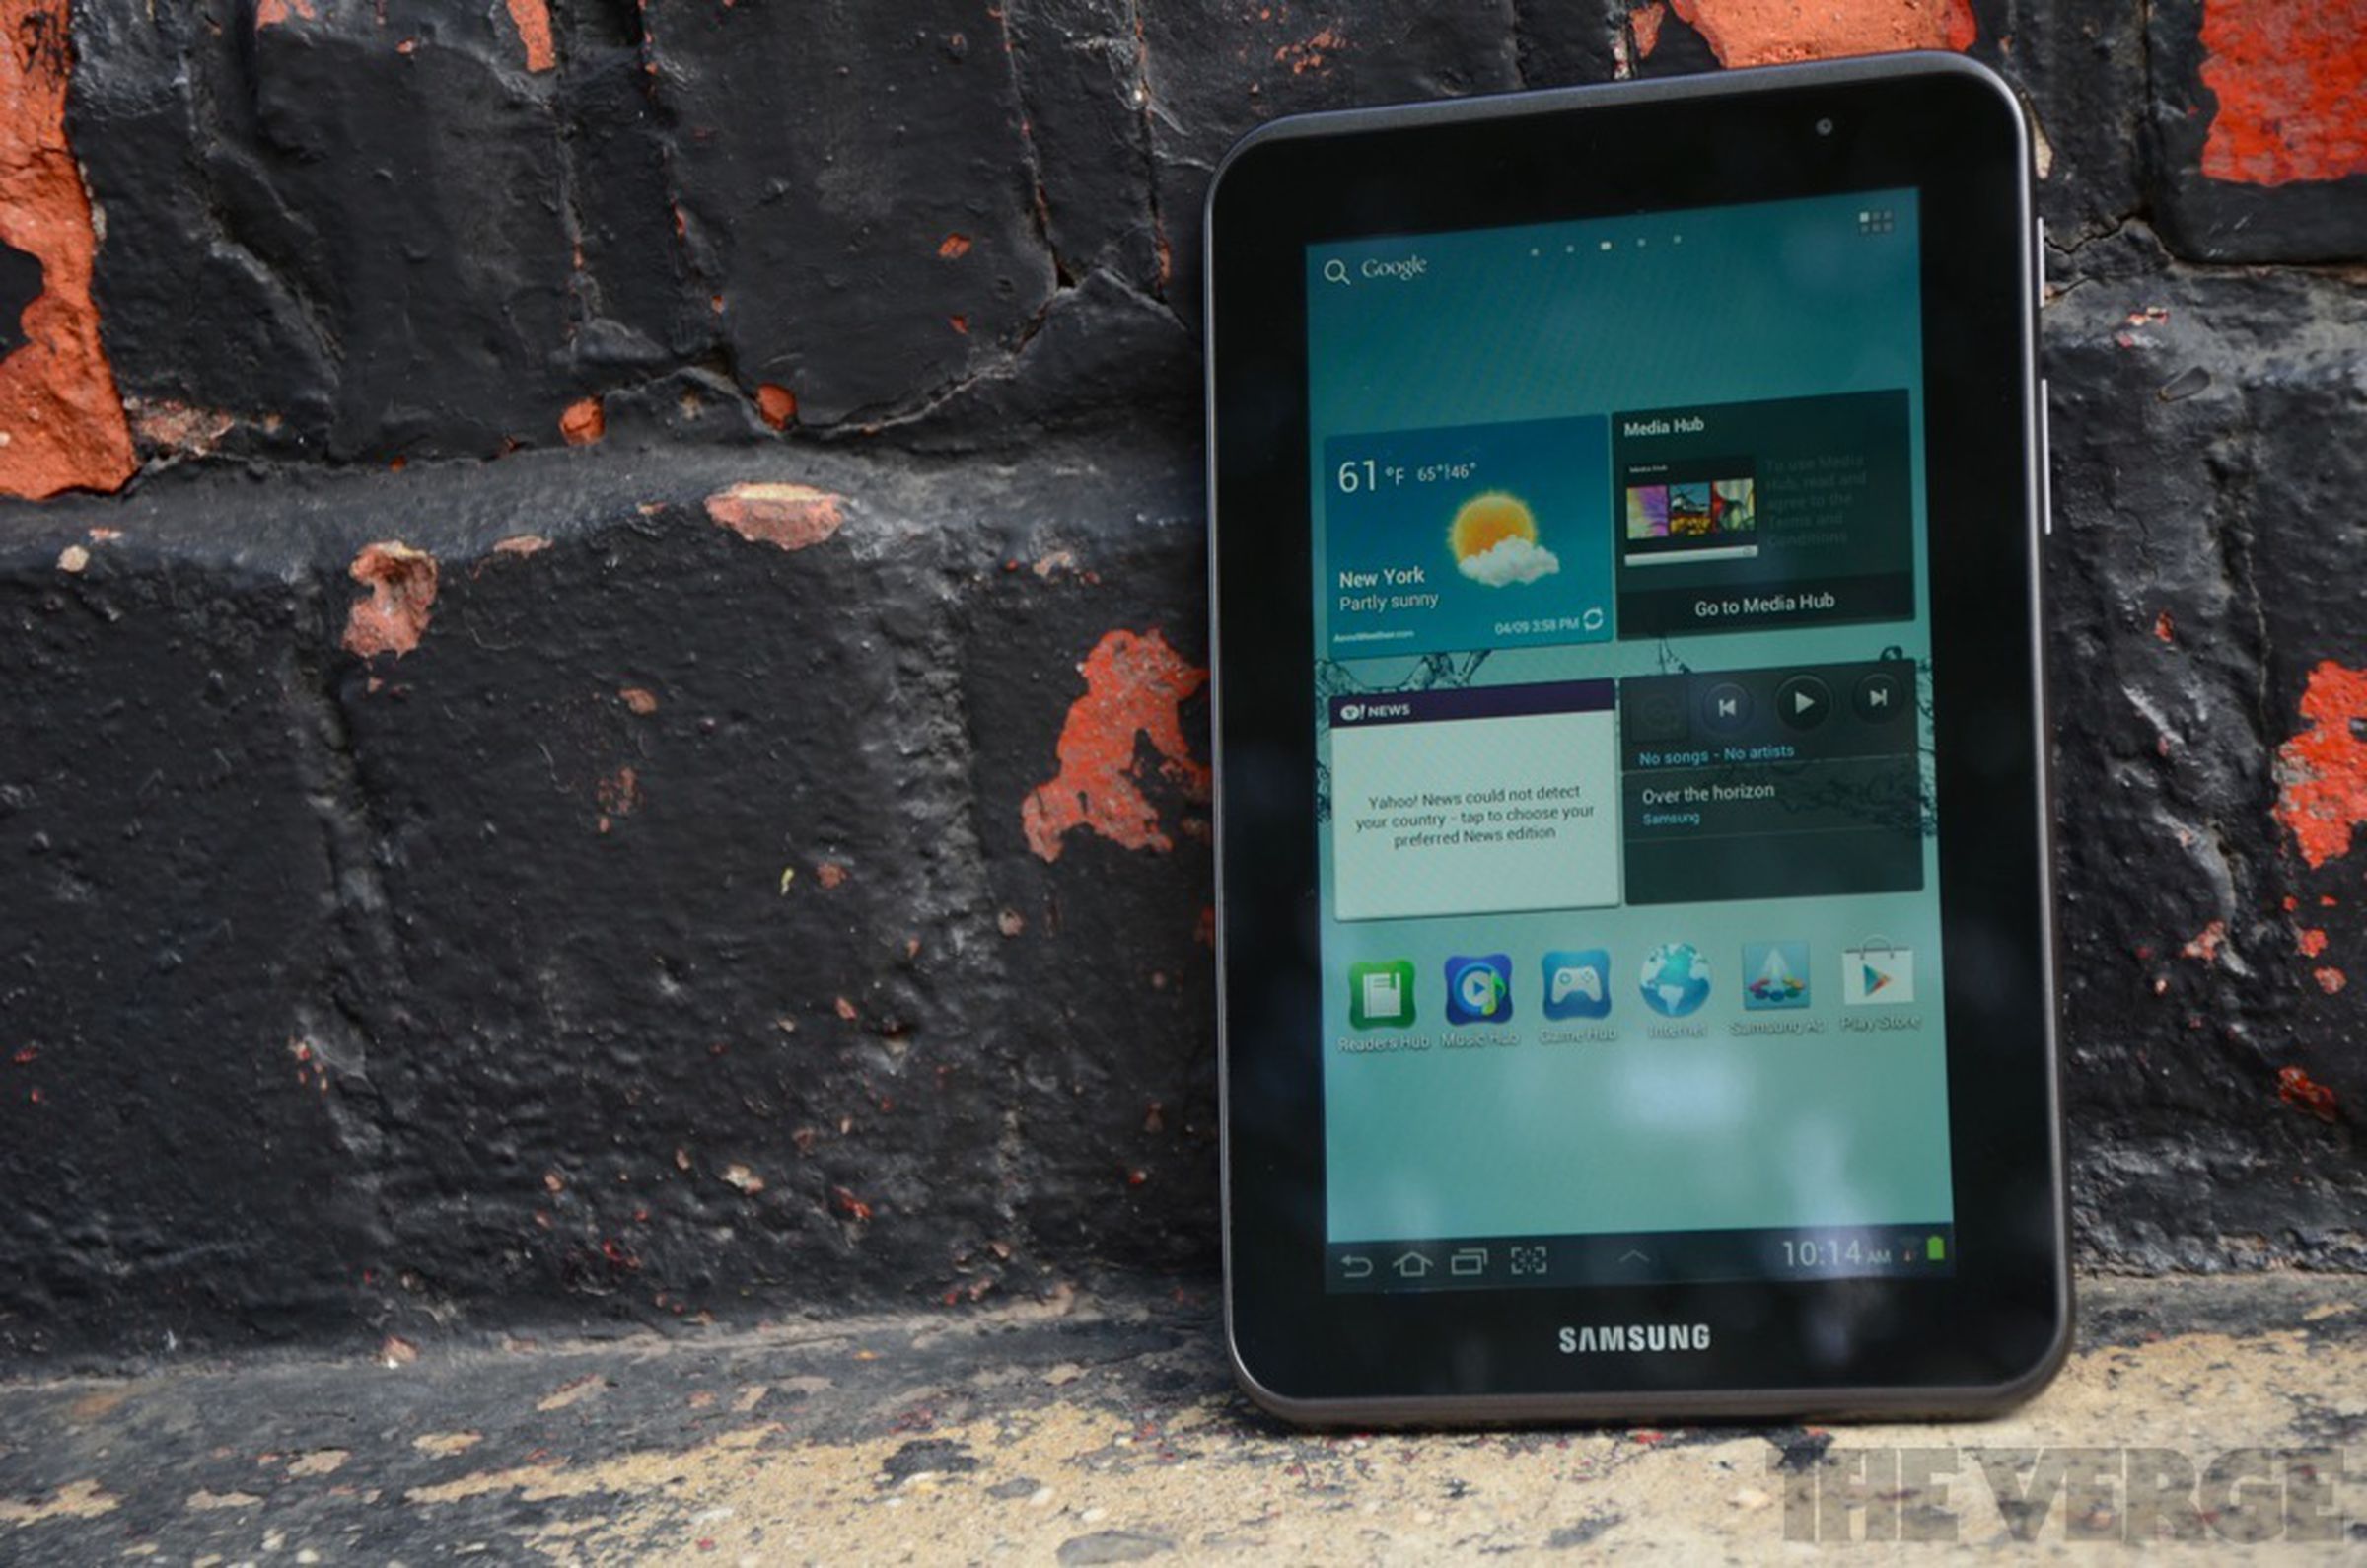 Samsung Galaxy Tab 2 7.0 review pictures